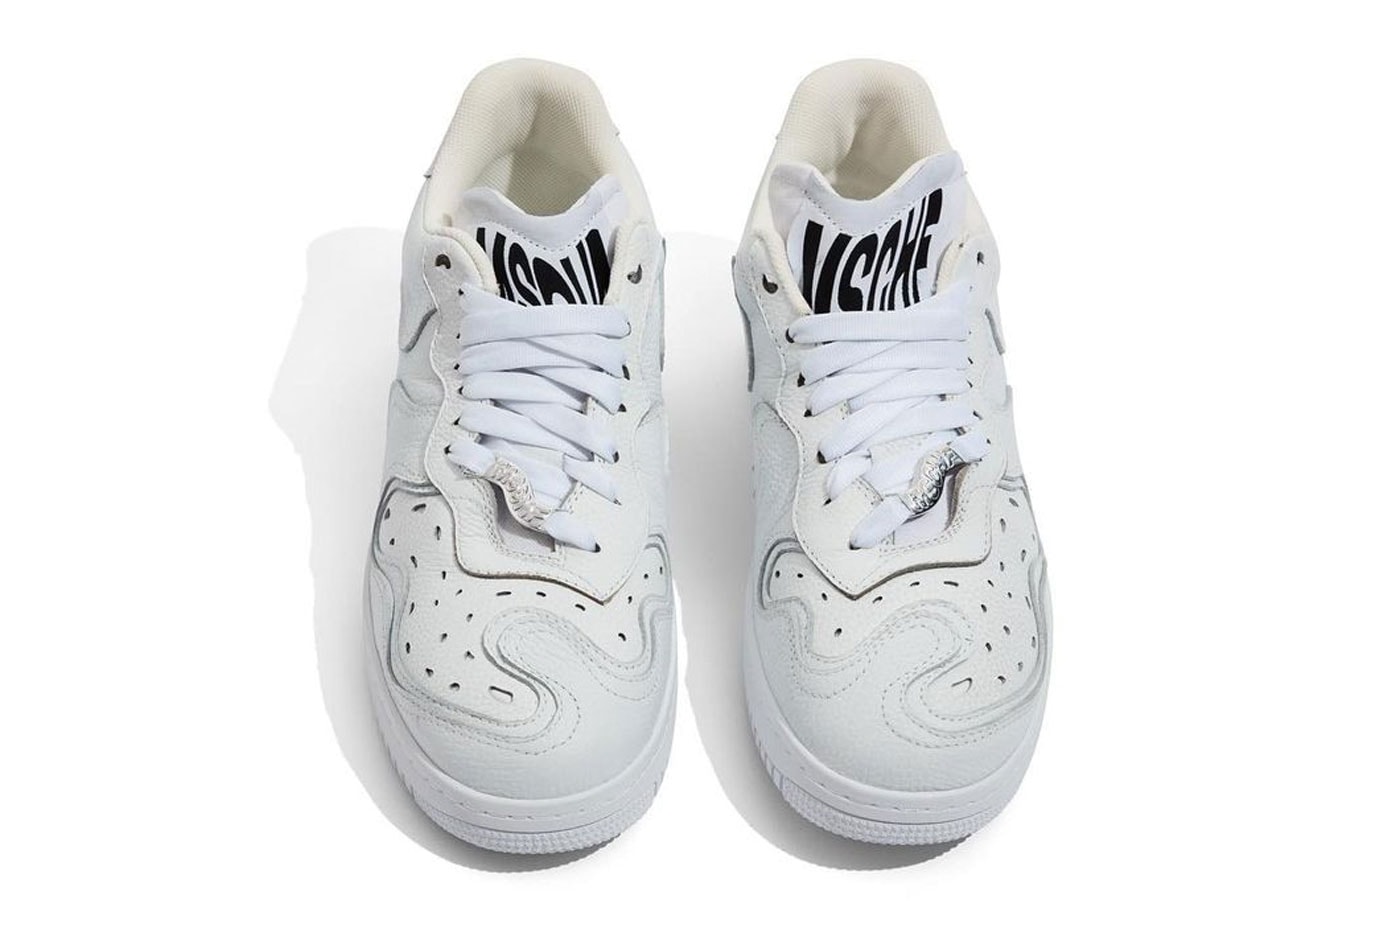 MSCHF Super Normal Sneakers Air Force 1 Wavy Inspired Release Info